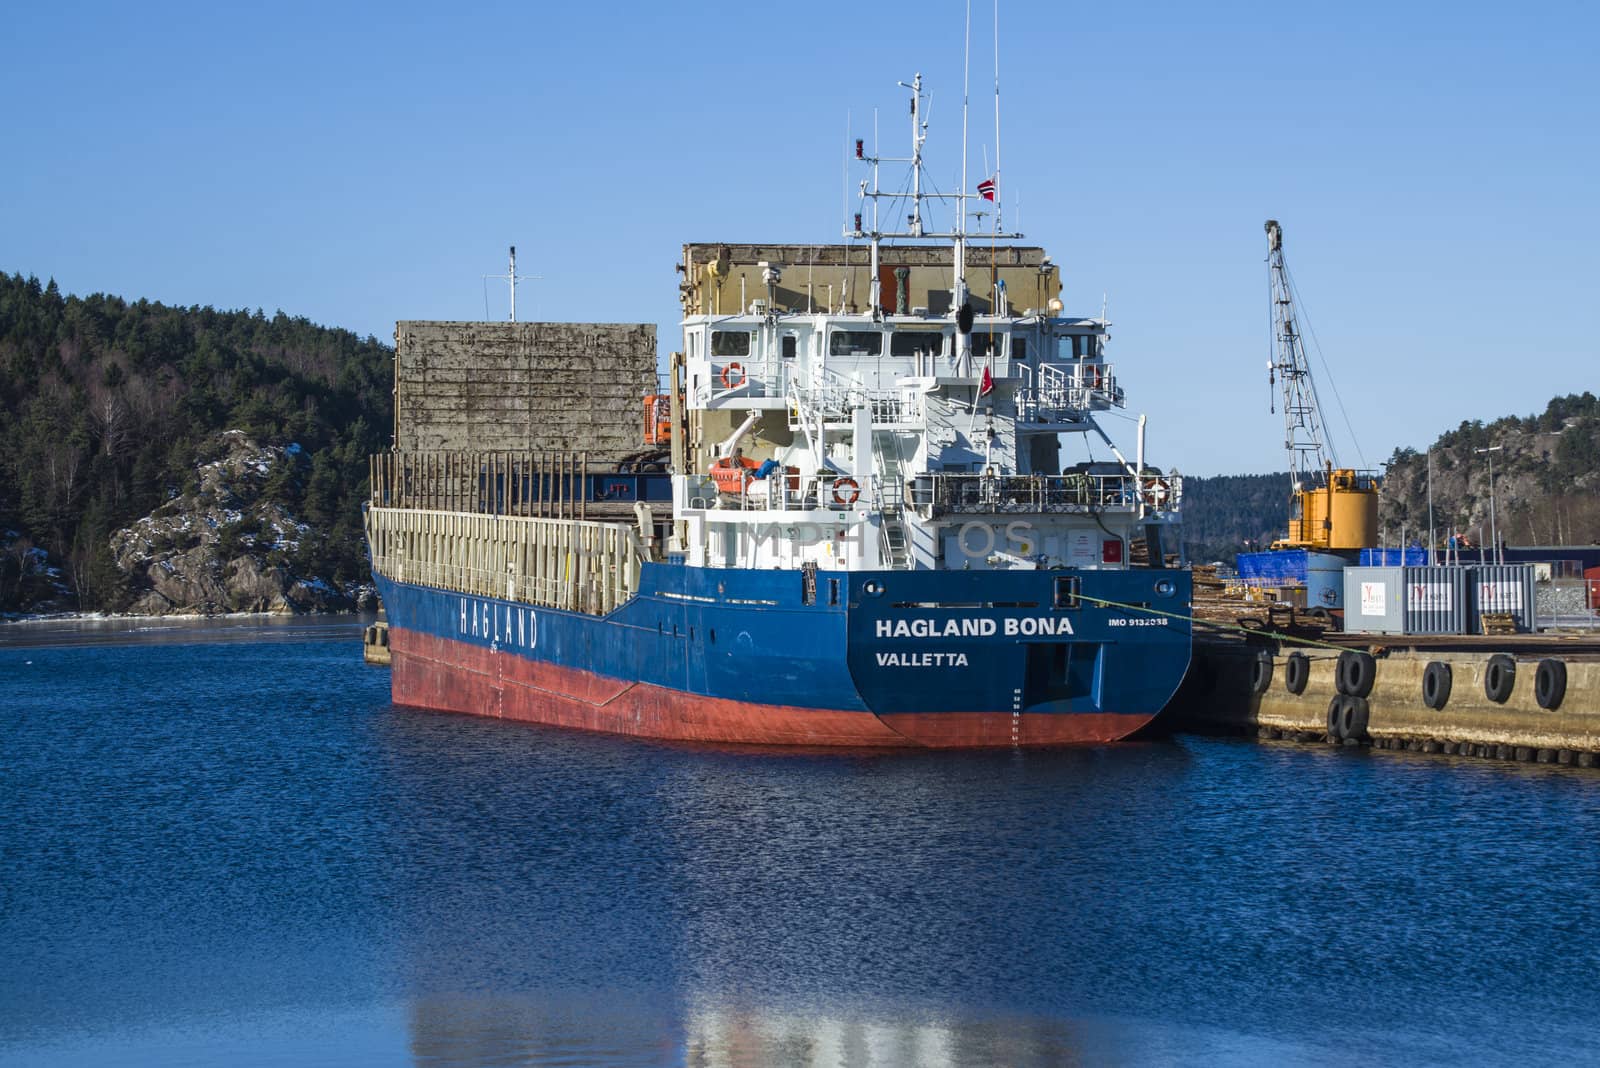 MV Hagland Bona is docked at the port of Halden, Norway and unloading timber. The picture is shot one day in March 2013.